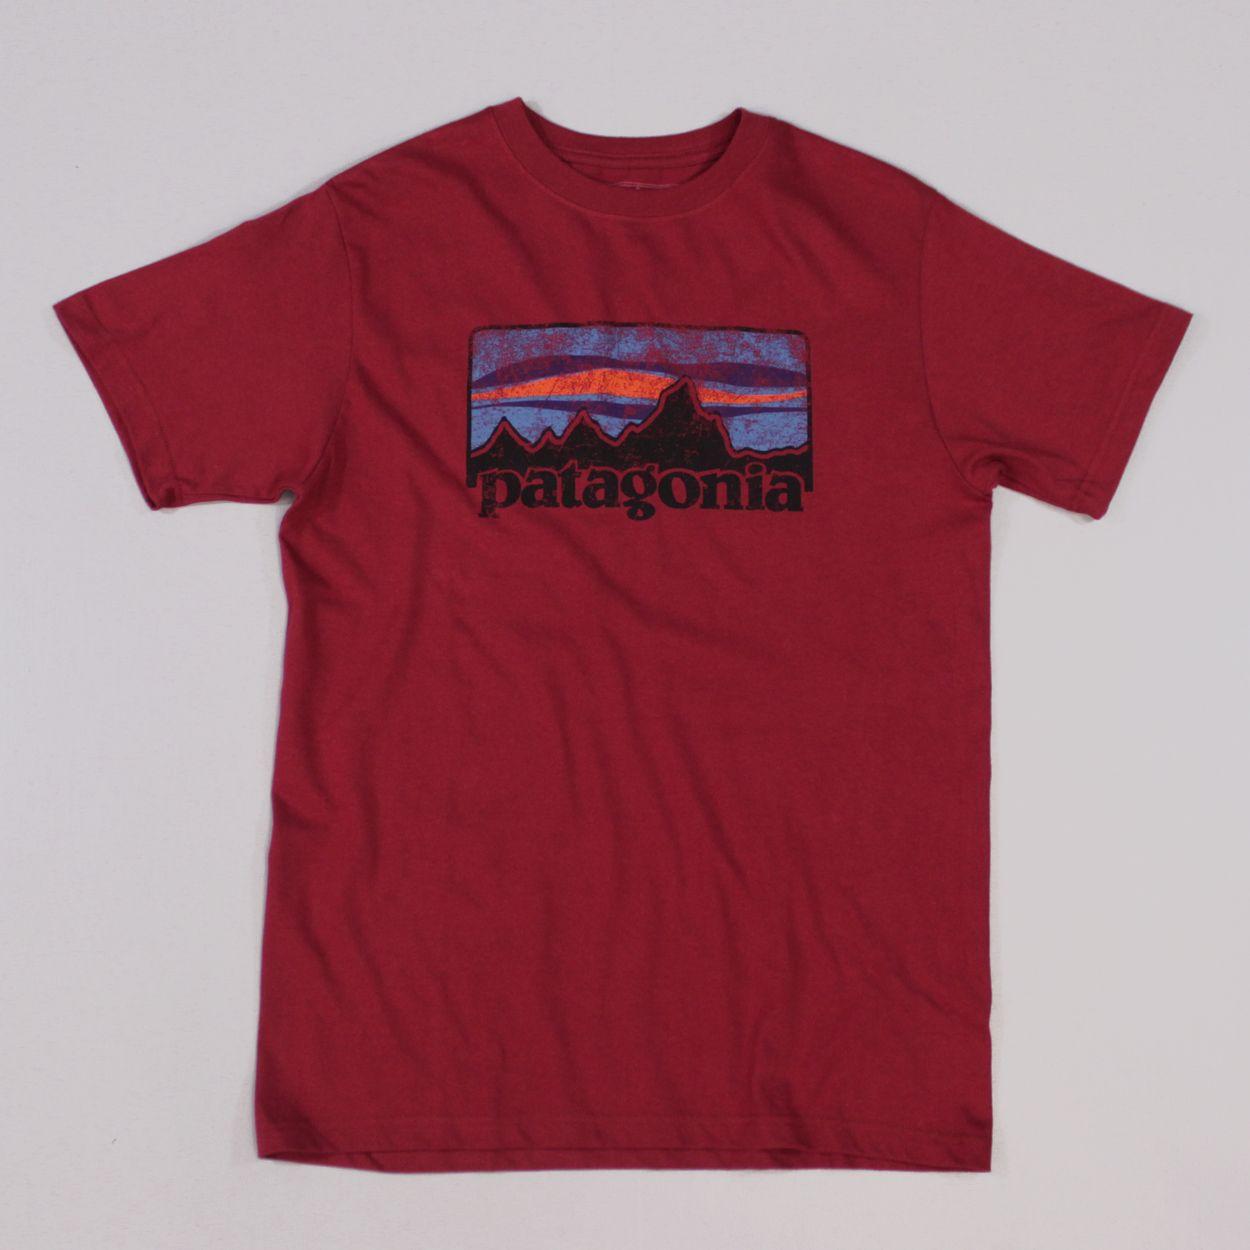 Red Outdoor Logo - Patagonia Vintage 73 Logo Mens Tee Wax Red Blue Climbing Outdoor £12.50